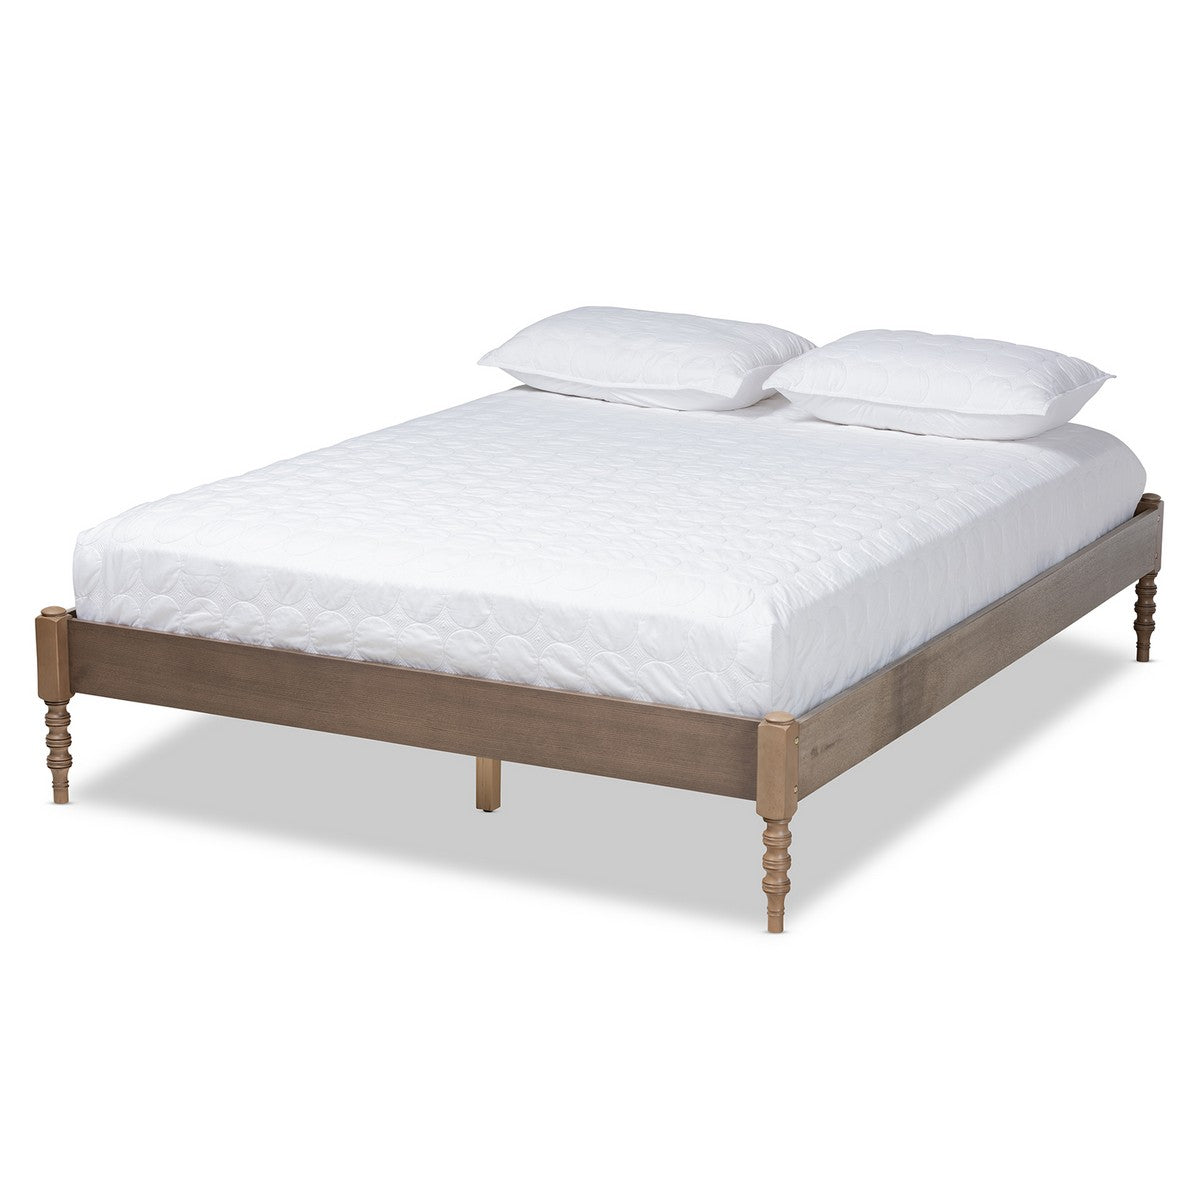 Baxton Studio Cielle French Bohemian Weathered Grey Oak Finished Wood Queen Size Platform Bed Frame Baxton Studio-Bed Frames-Minimal And Modern - 1